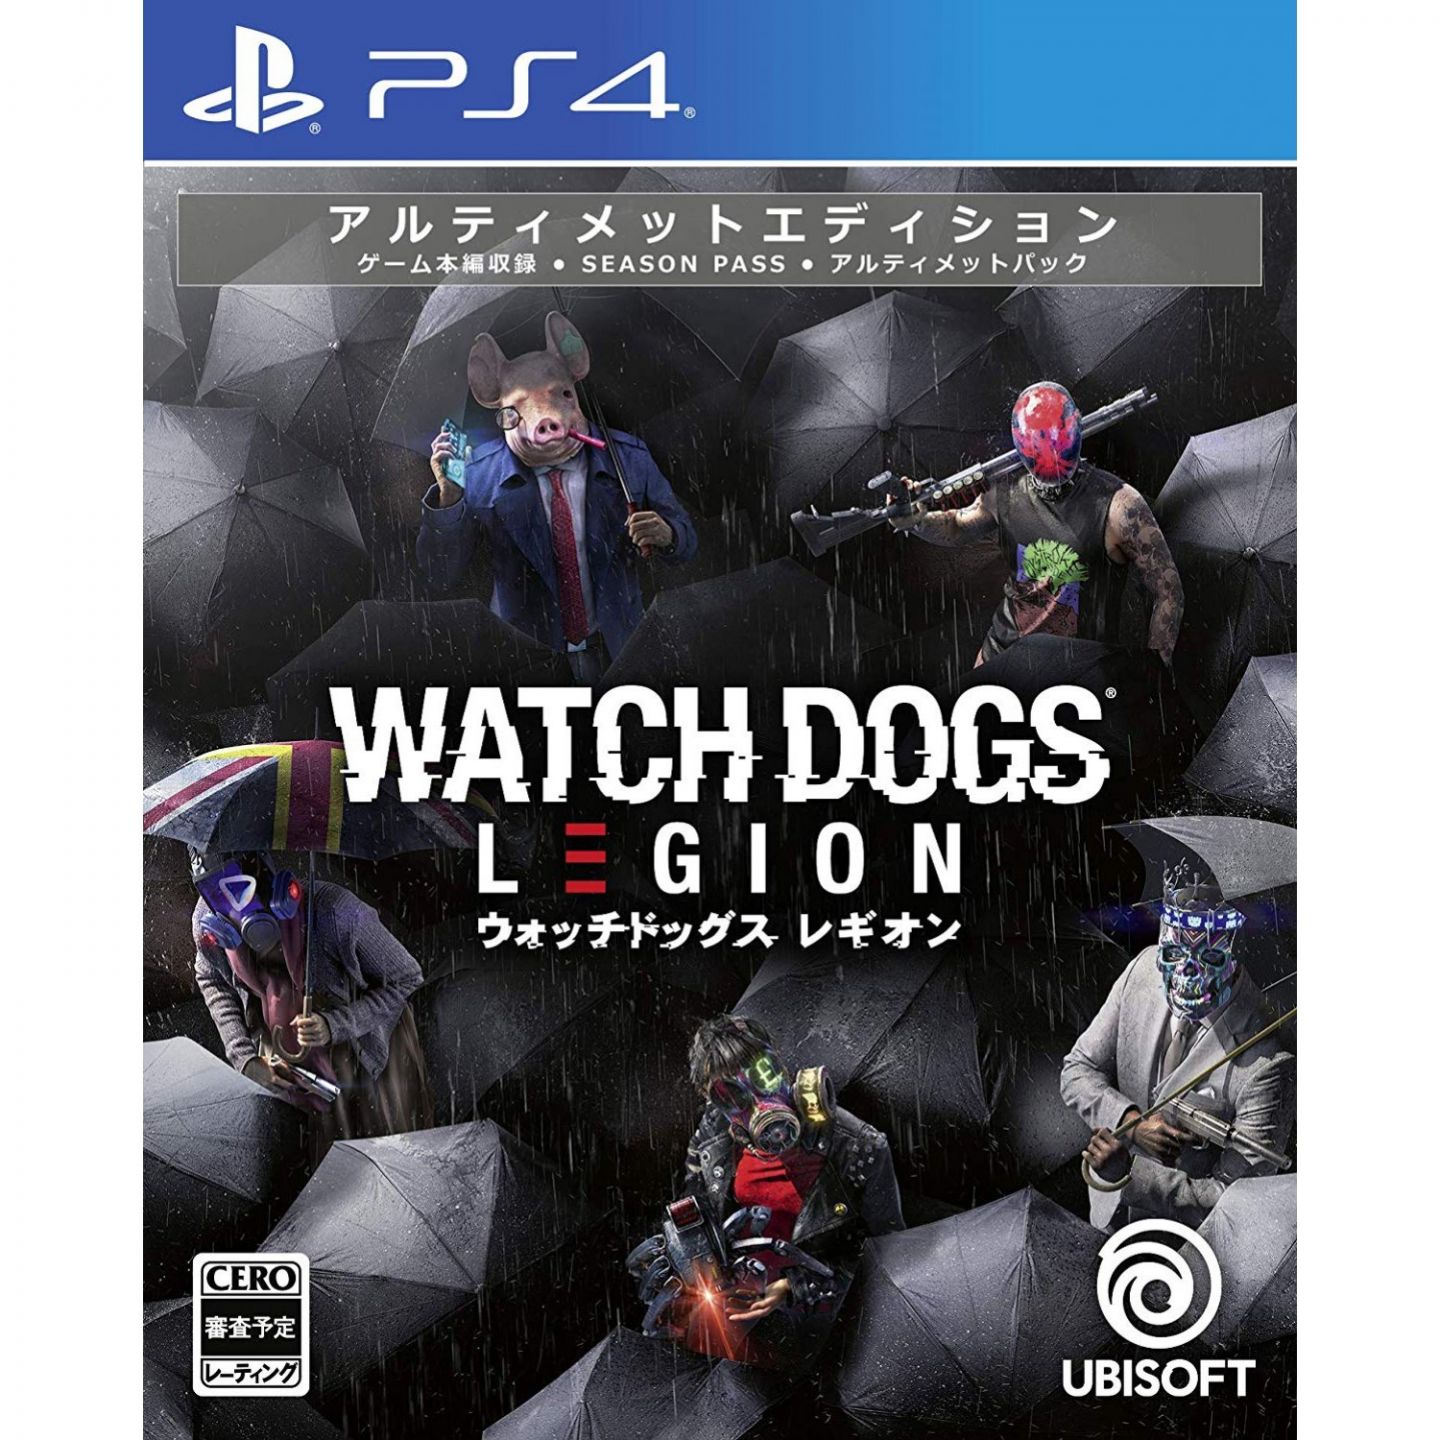 Ubisoft WATCH DOGS LEGION ULTIMATE PS4 4 Playstation EDITION